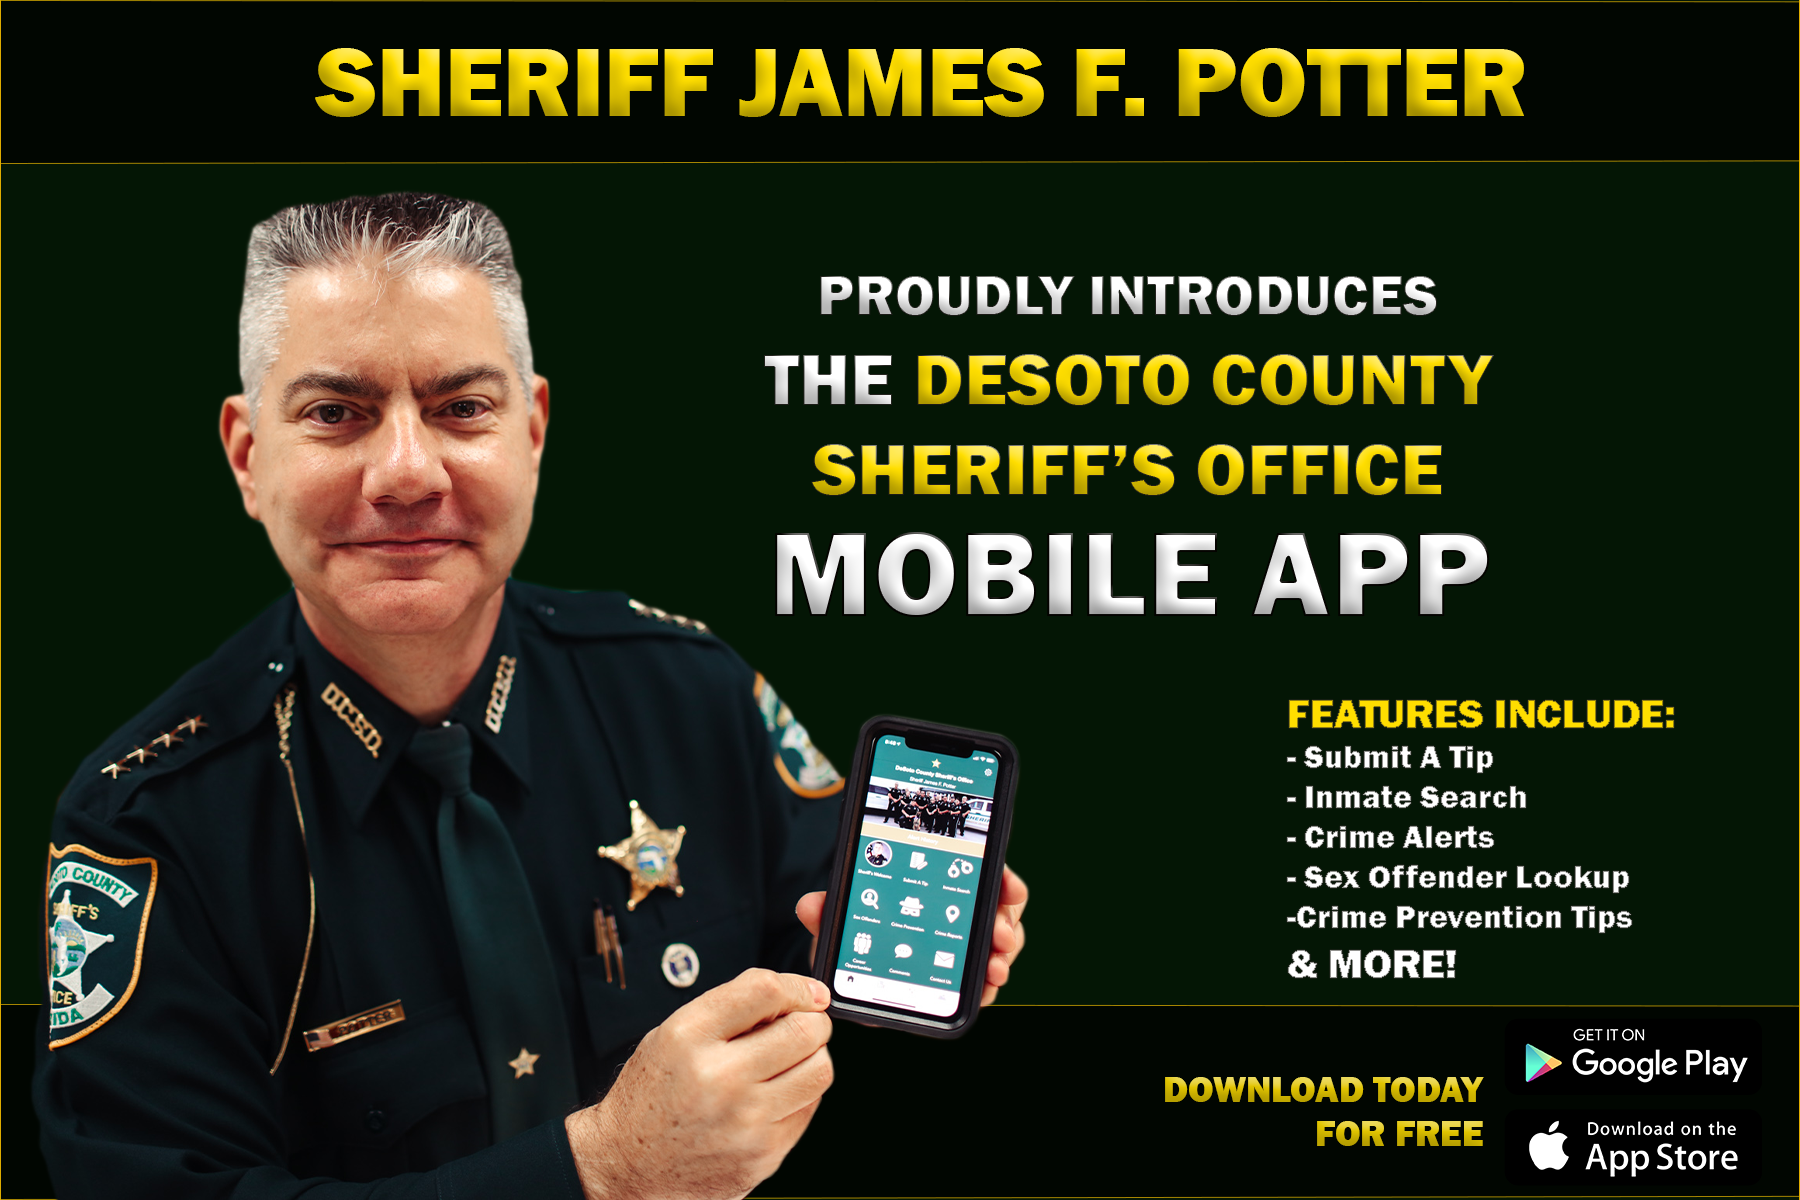 "Sheriff James F. Potter Proudly Introduces the DeSoto County Sheriff's Office Mobile App